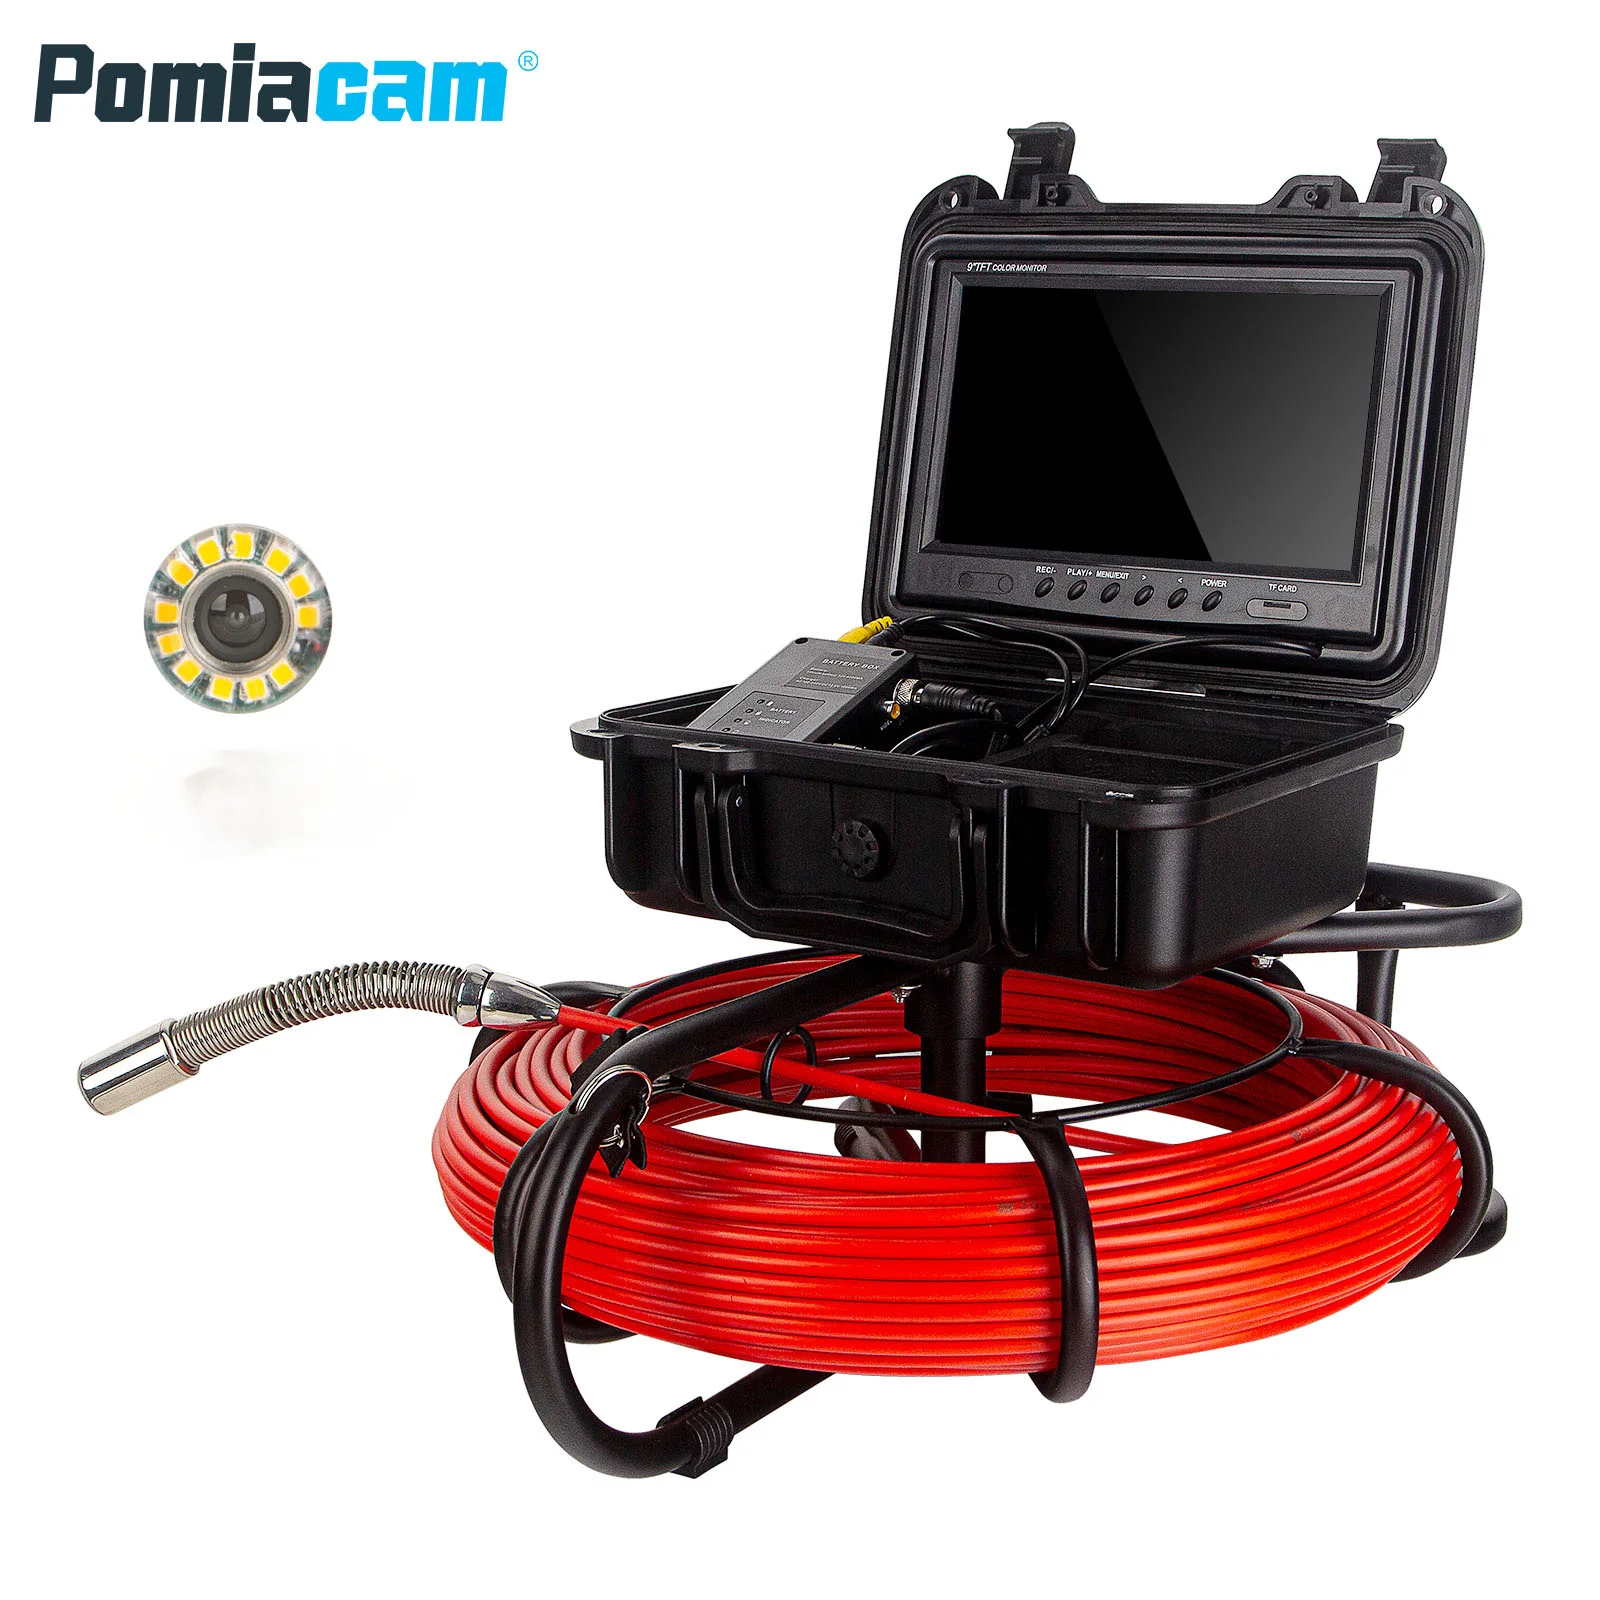 WP9600FD Sewer Camera 100ft Snake Cam DVR Video Pipe Inspection Equipment 9 inch LCD Monitor Duct 1200TVL Borescope Red cable